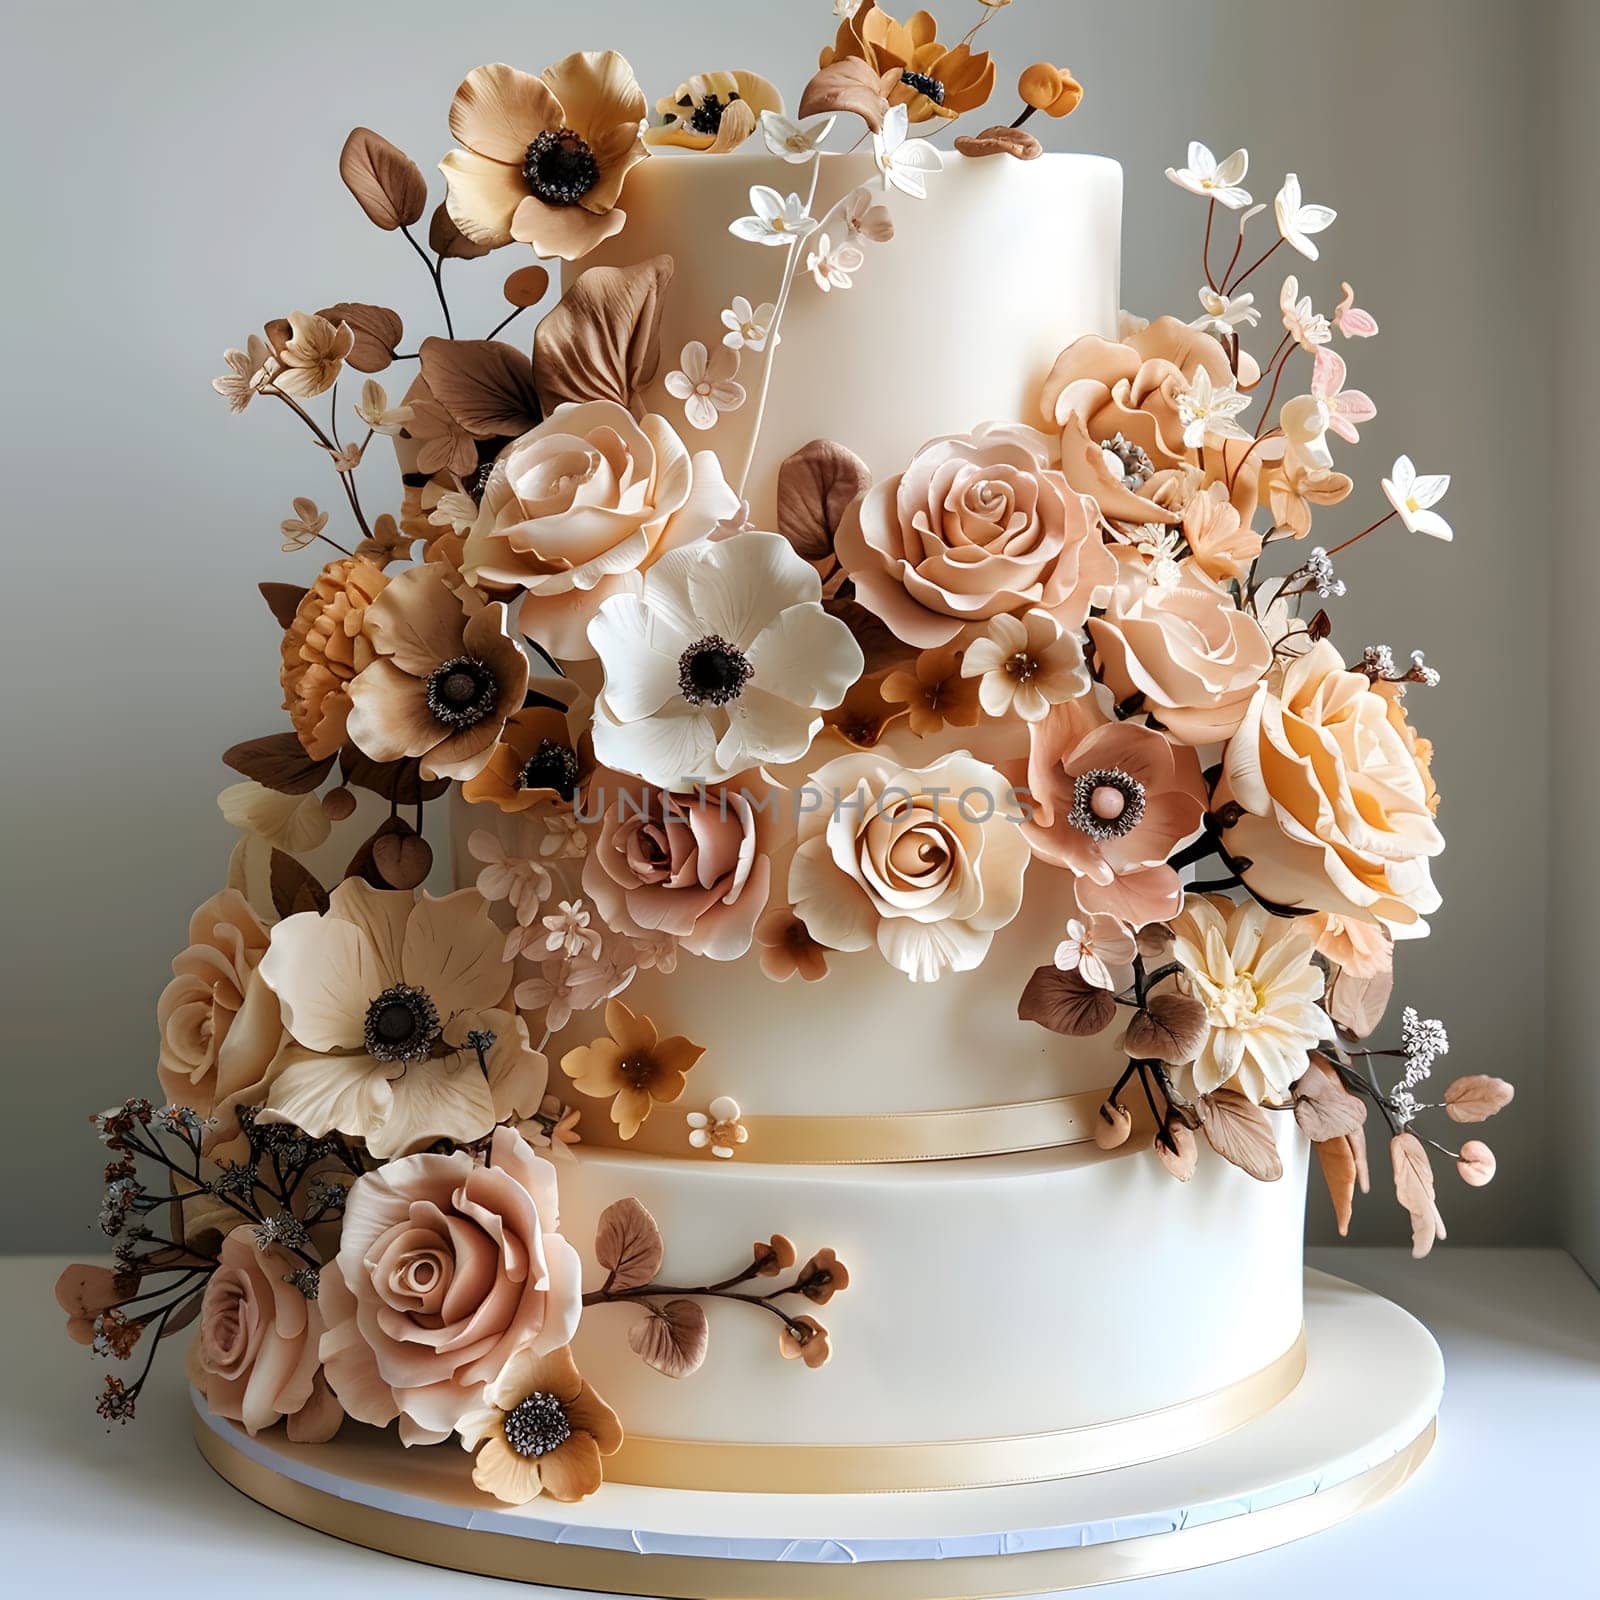 Elegant wedding cake adorned with flowers, perfect for your special day by Nadtochiy